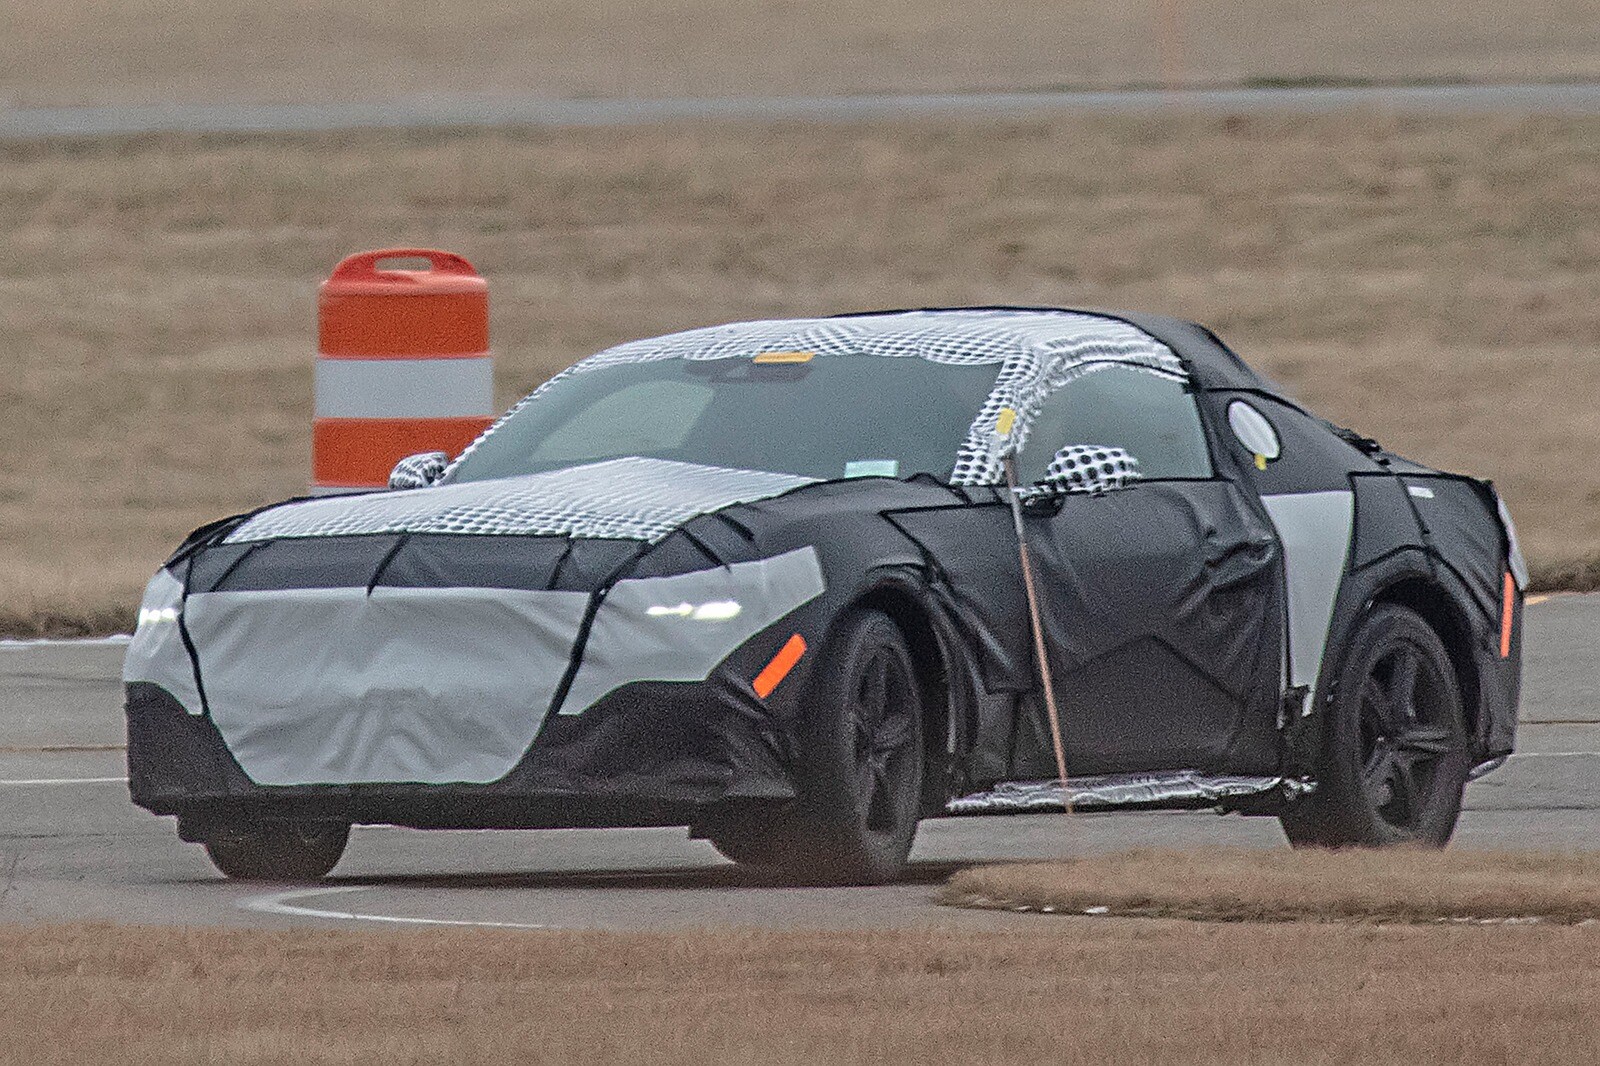 Next Generation Ford Mustang Spied Testing In New Body | Edmunds